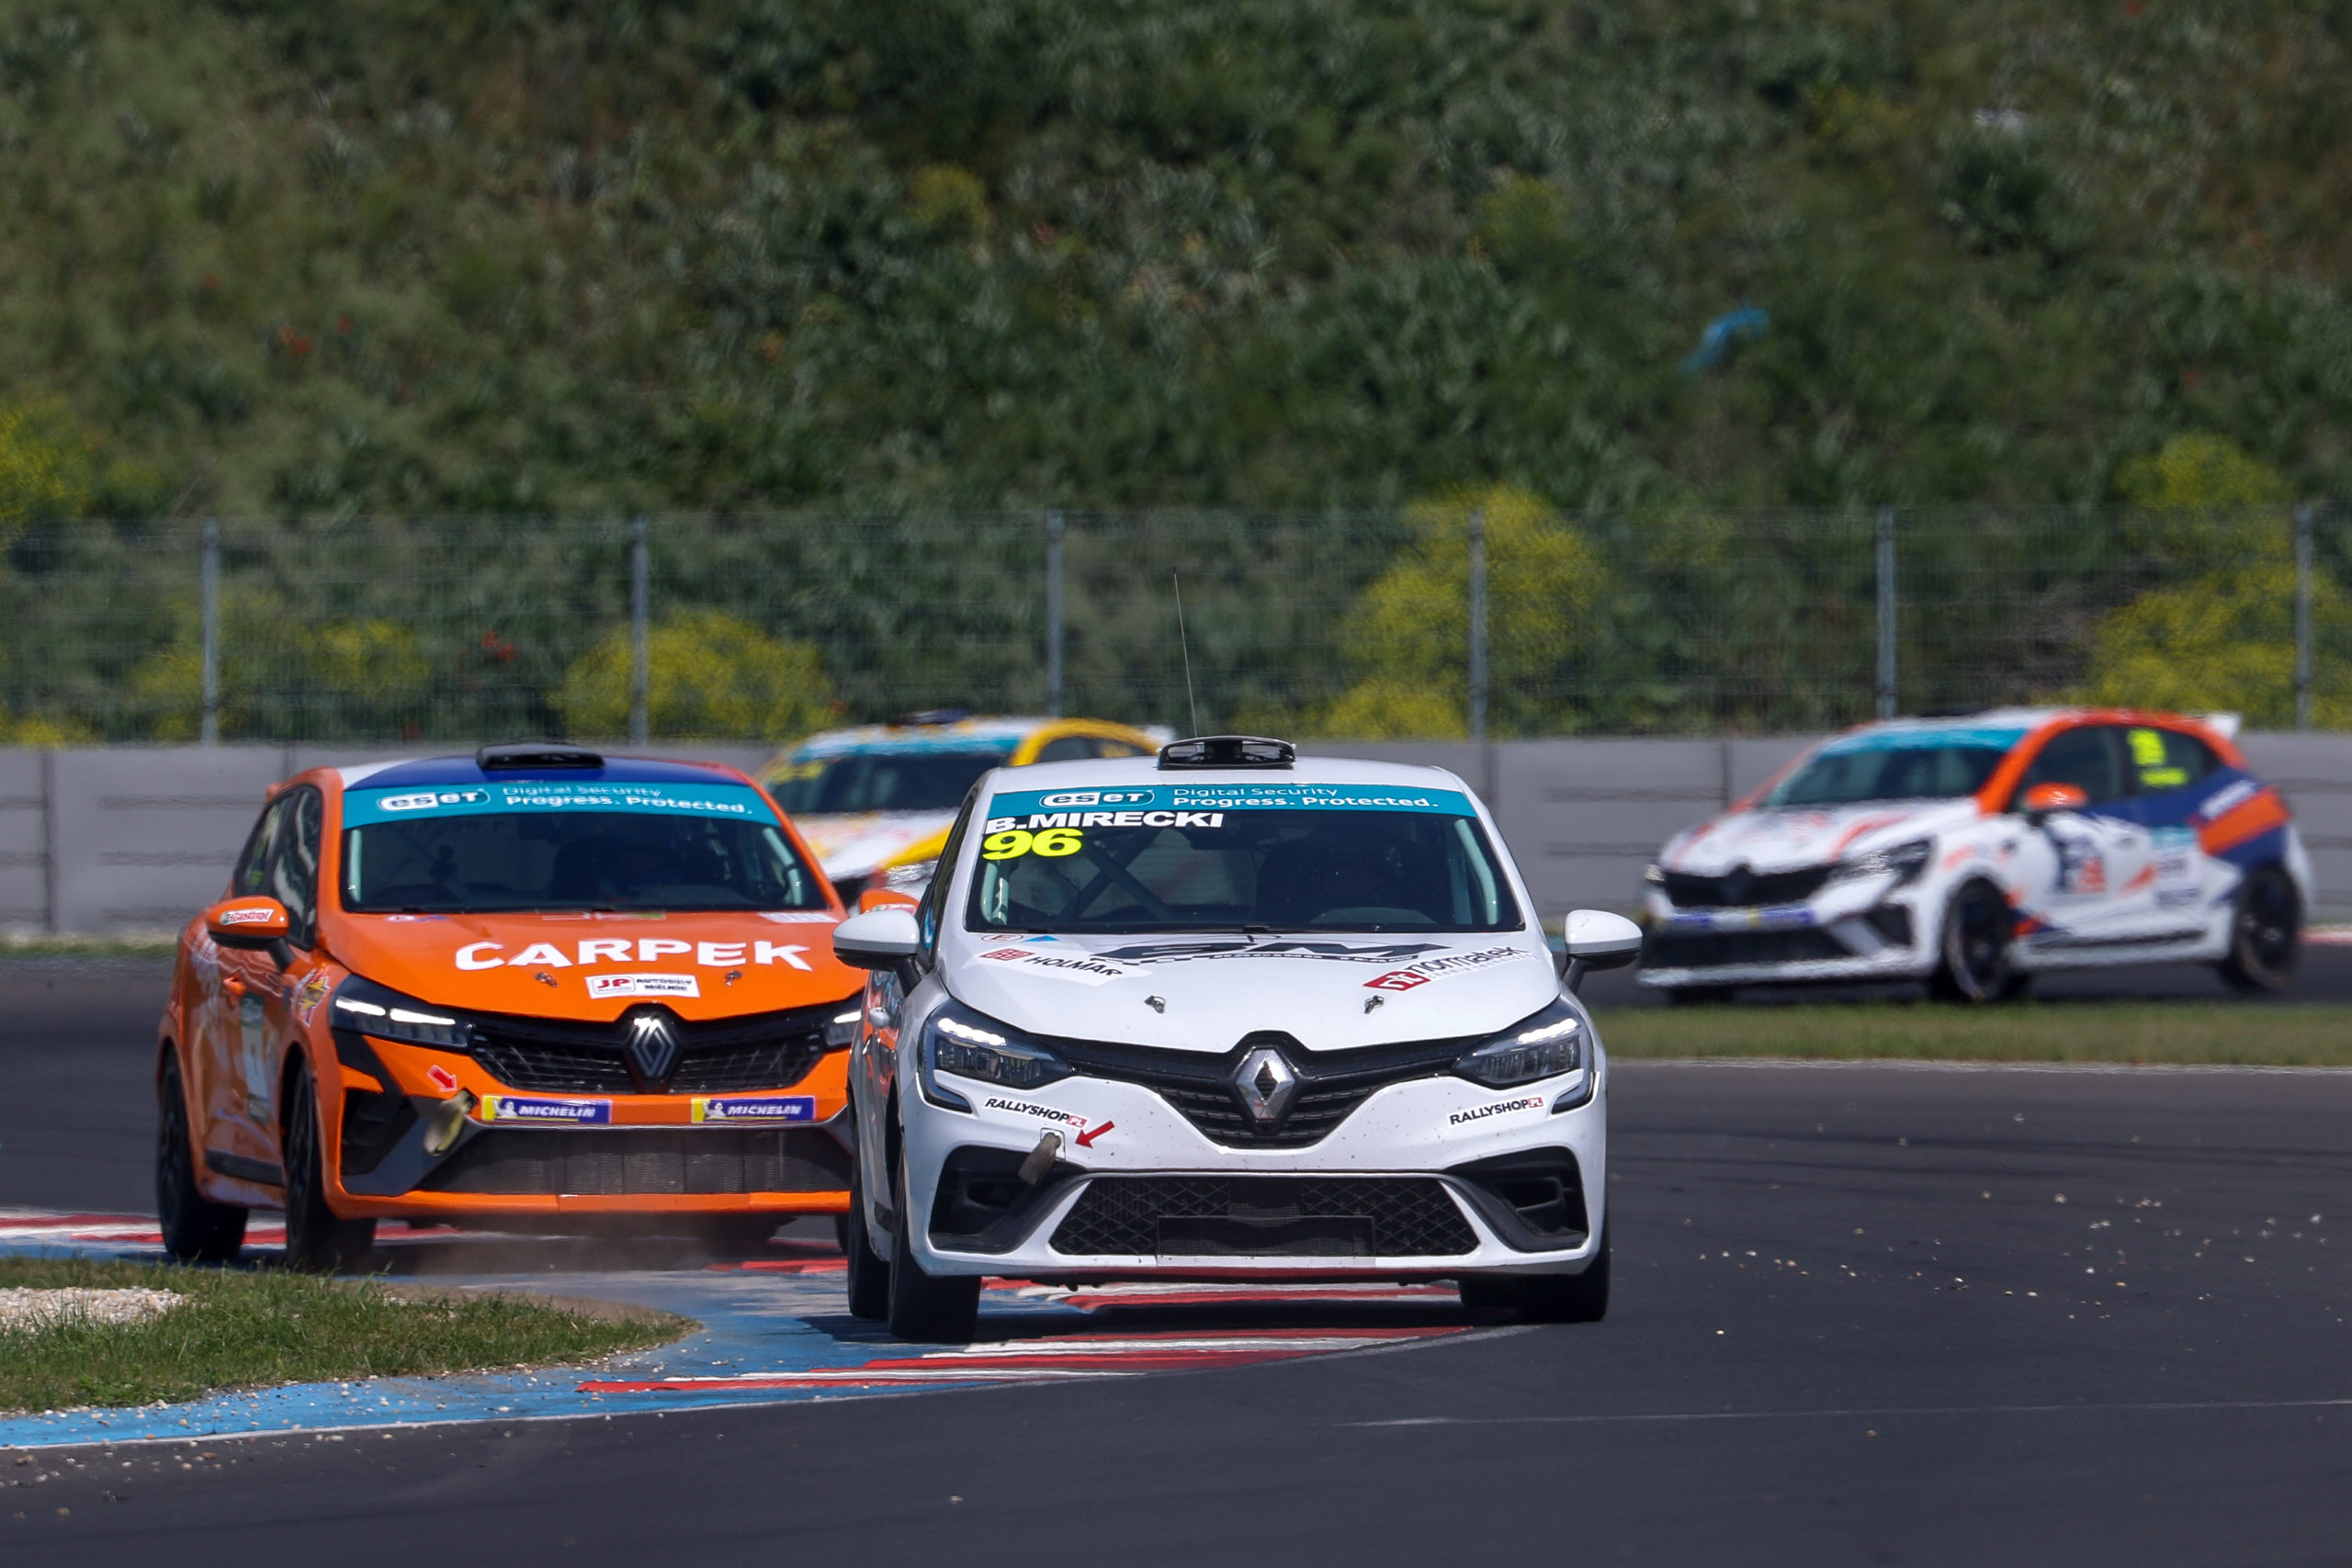 Recap of the opening event of the Clio Cup